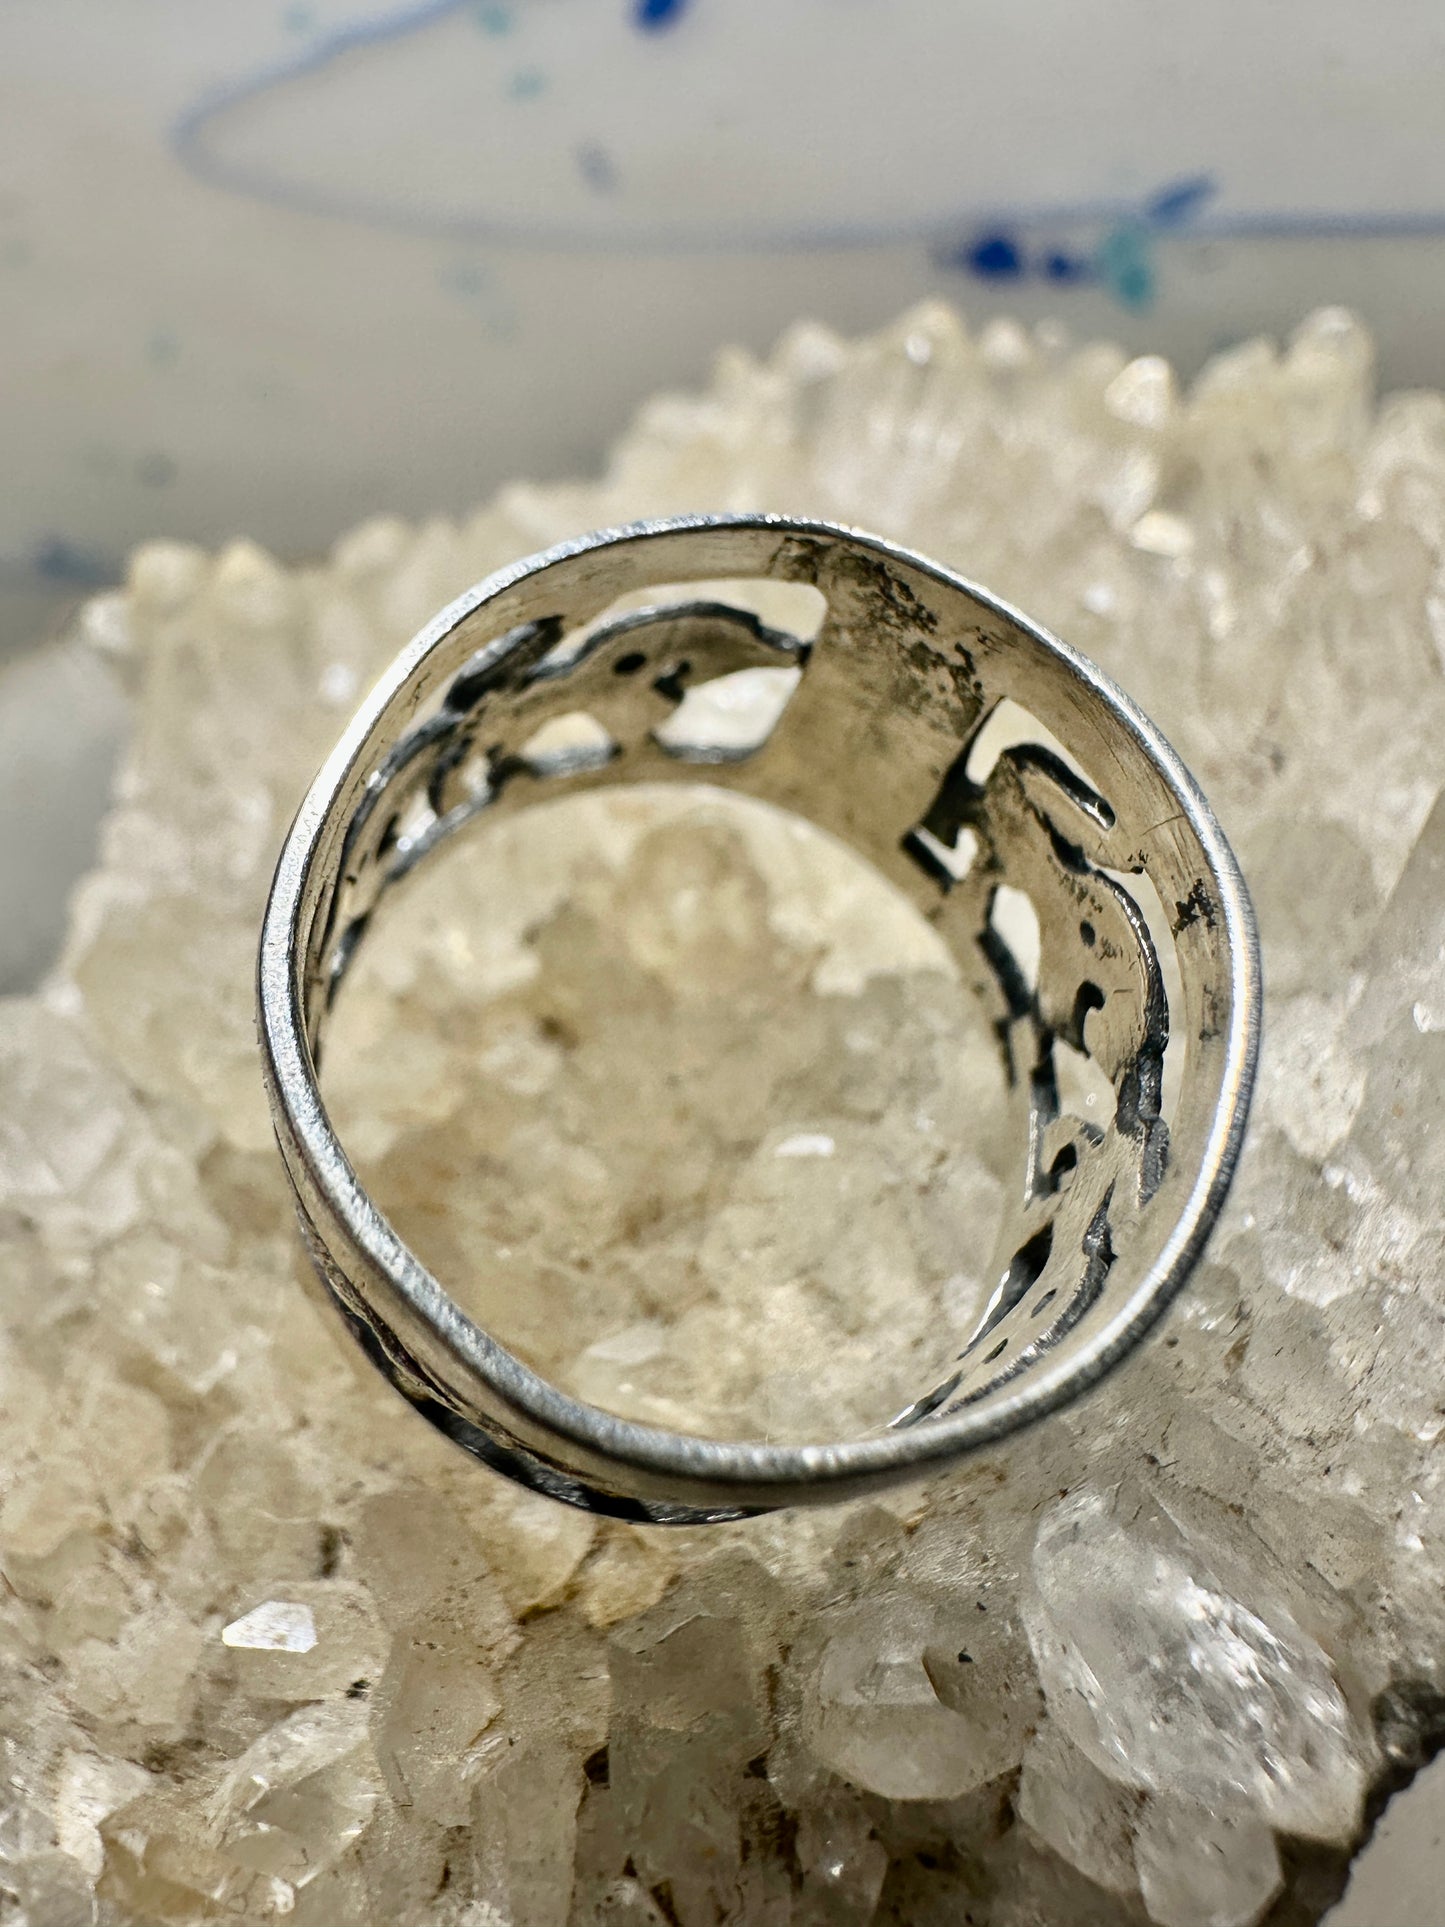 Horse ring Horses band size 5.50 sterling silver cowgirl women girls